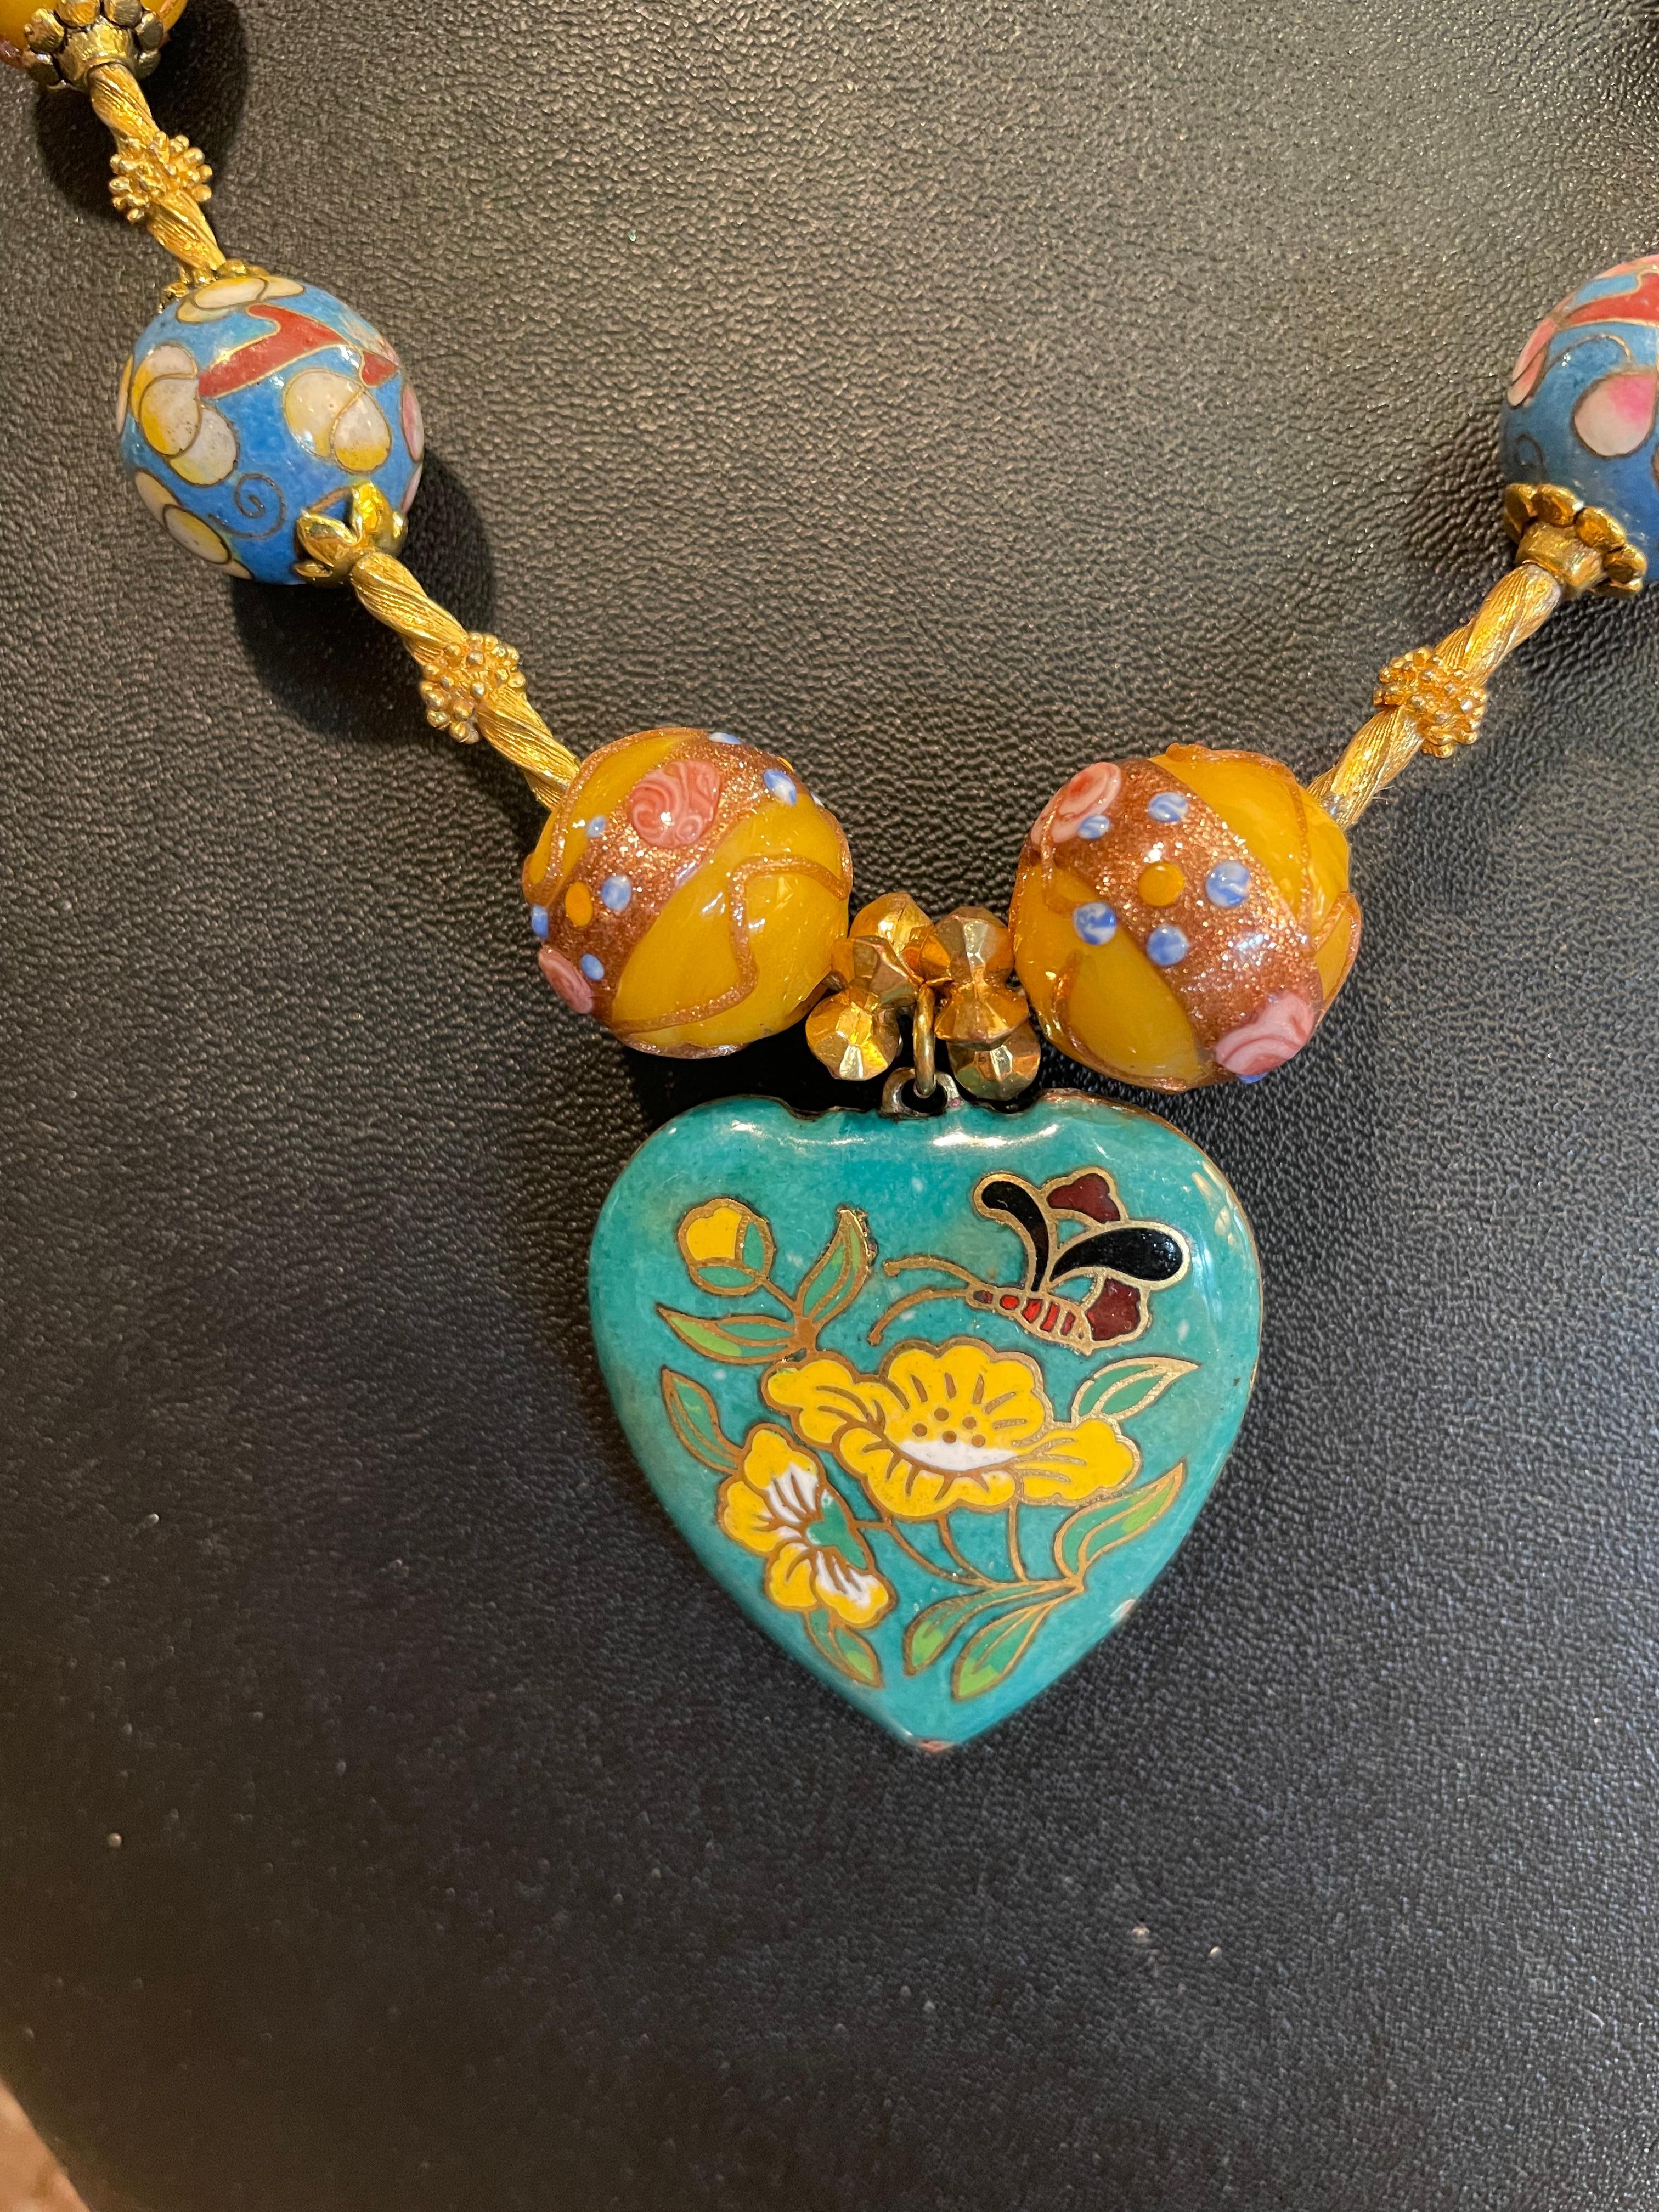 LB vintage Chinese cloisonné heart necklace with Vintage Venetian wedding beads In Good Condition For Sale In Pittsburgh, PA